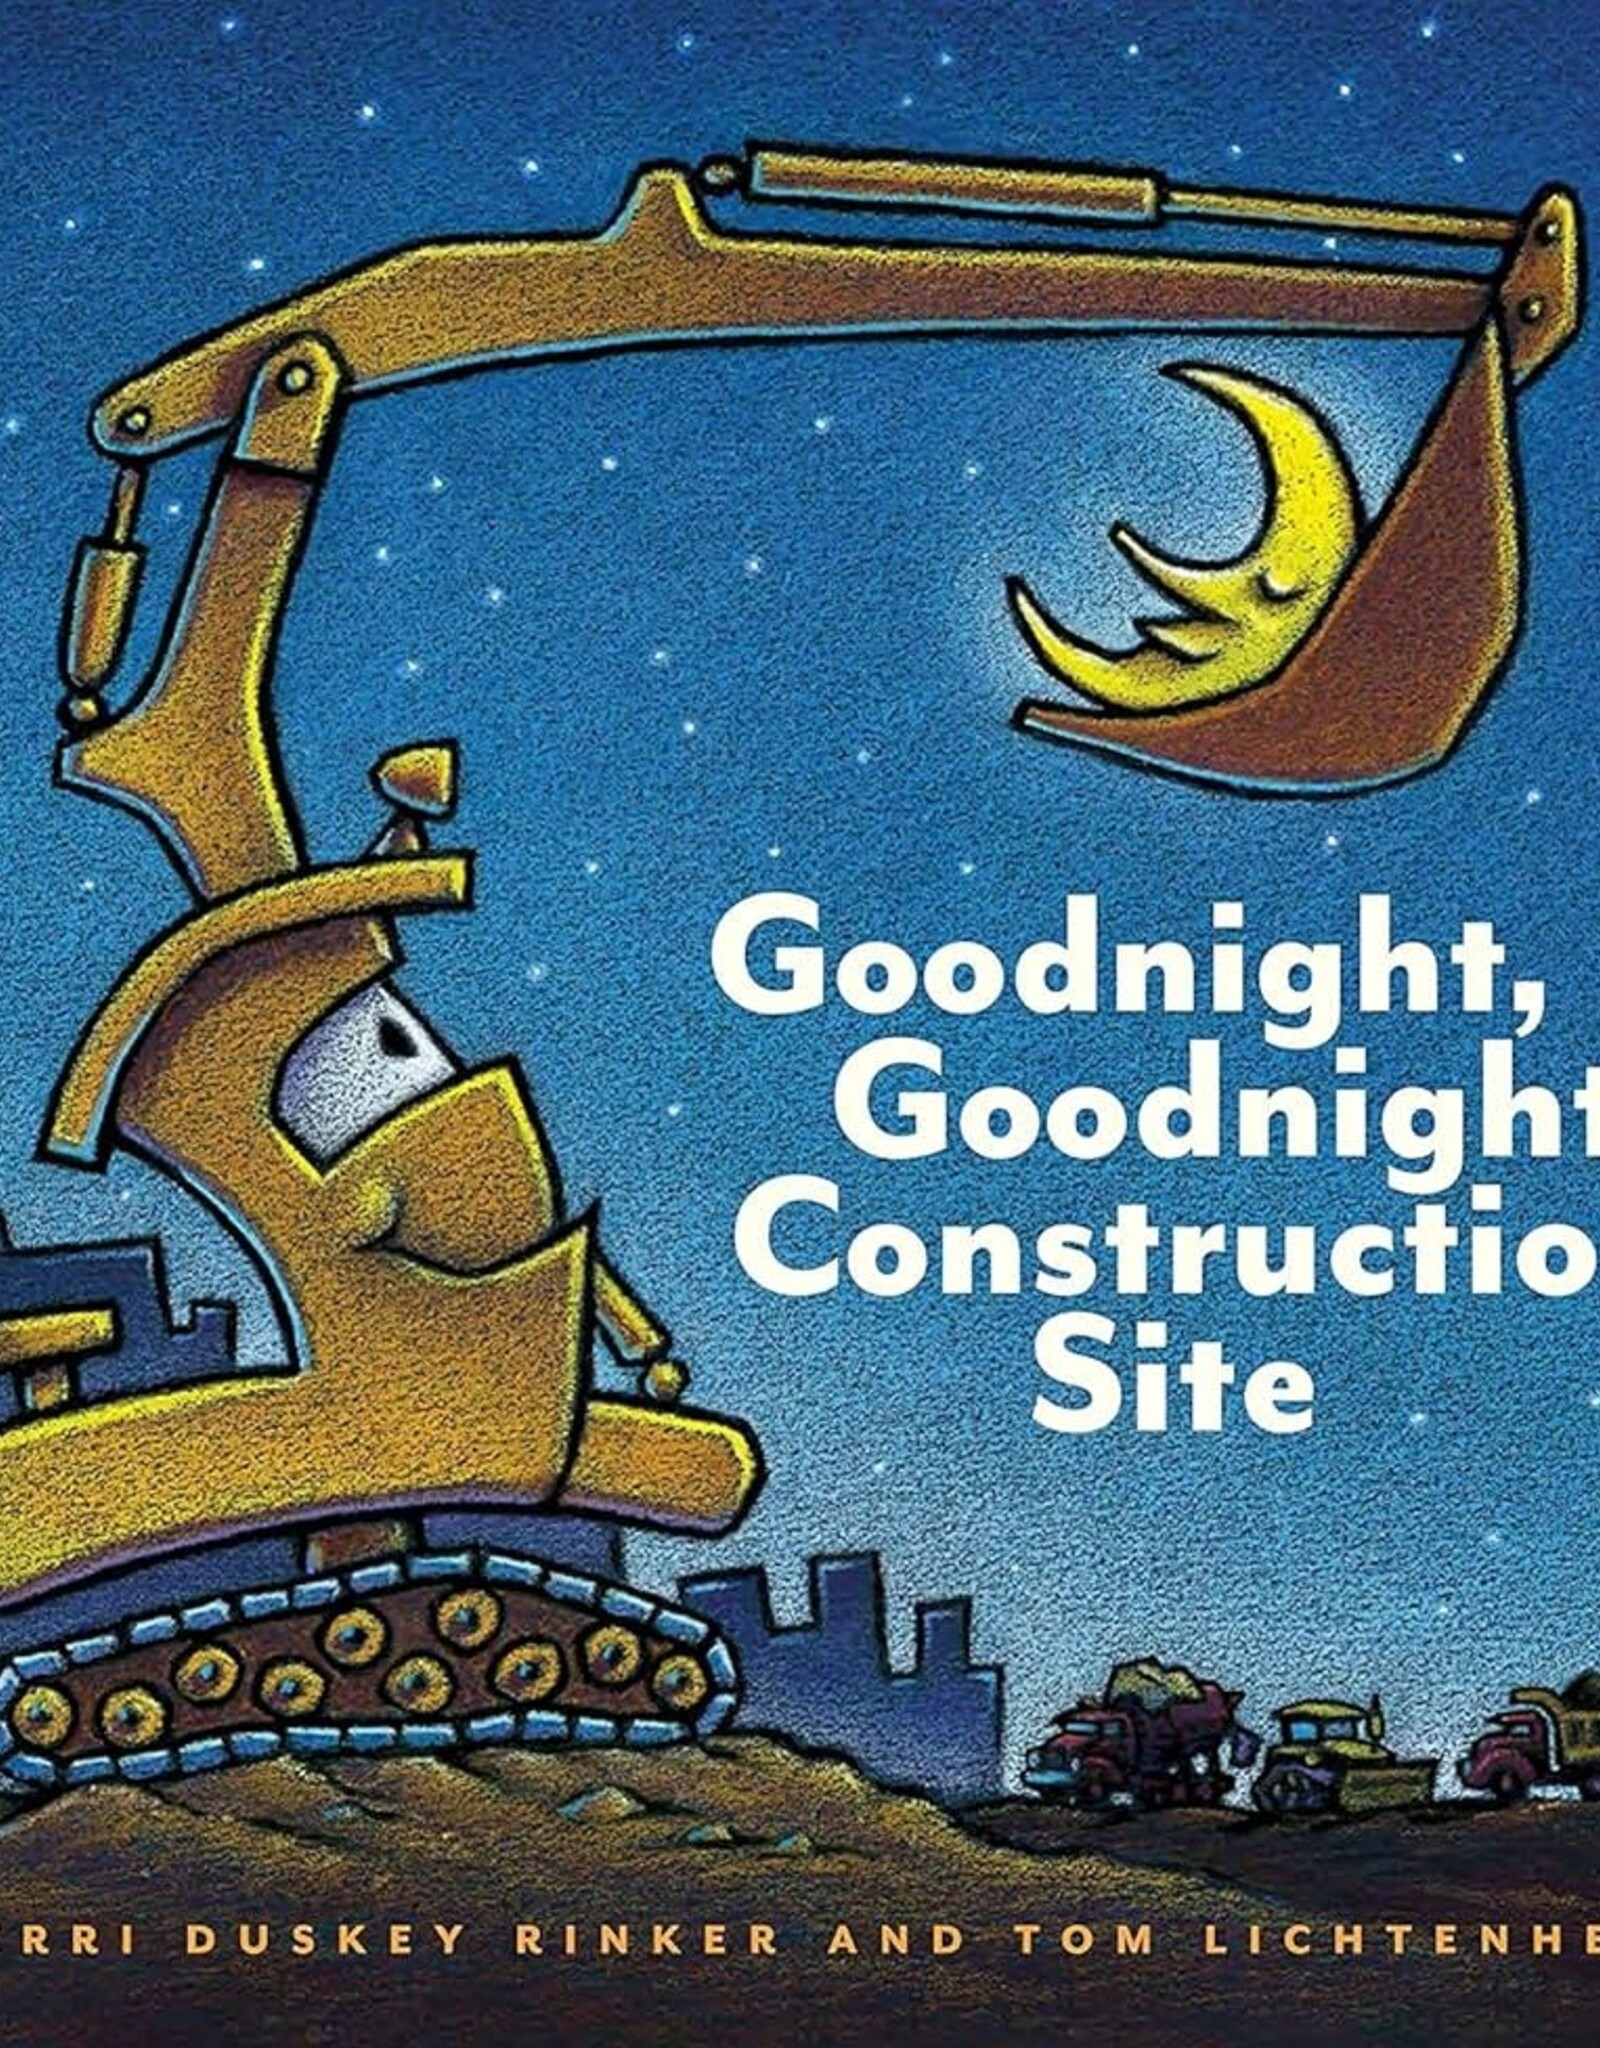 BOOK PUBLISHERS GOODNIGHT, GOODNIGHT, CONSTRUCTION SITE